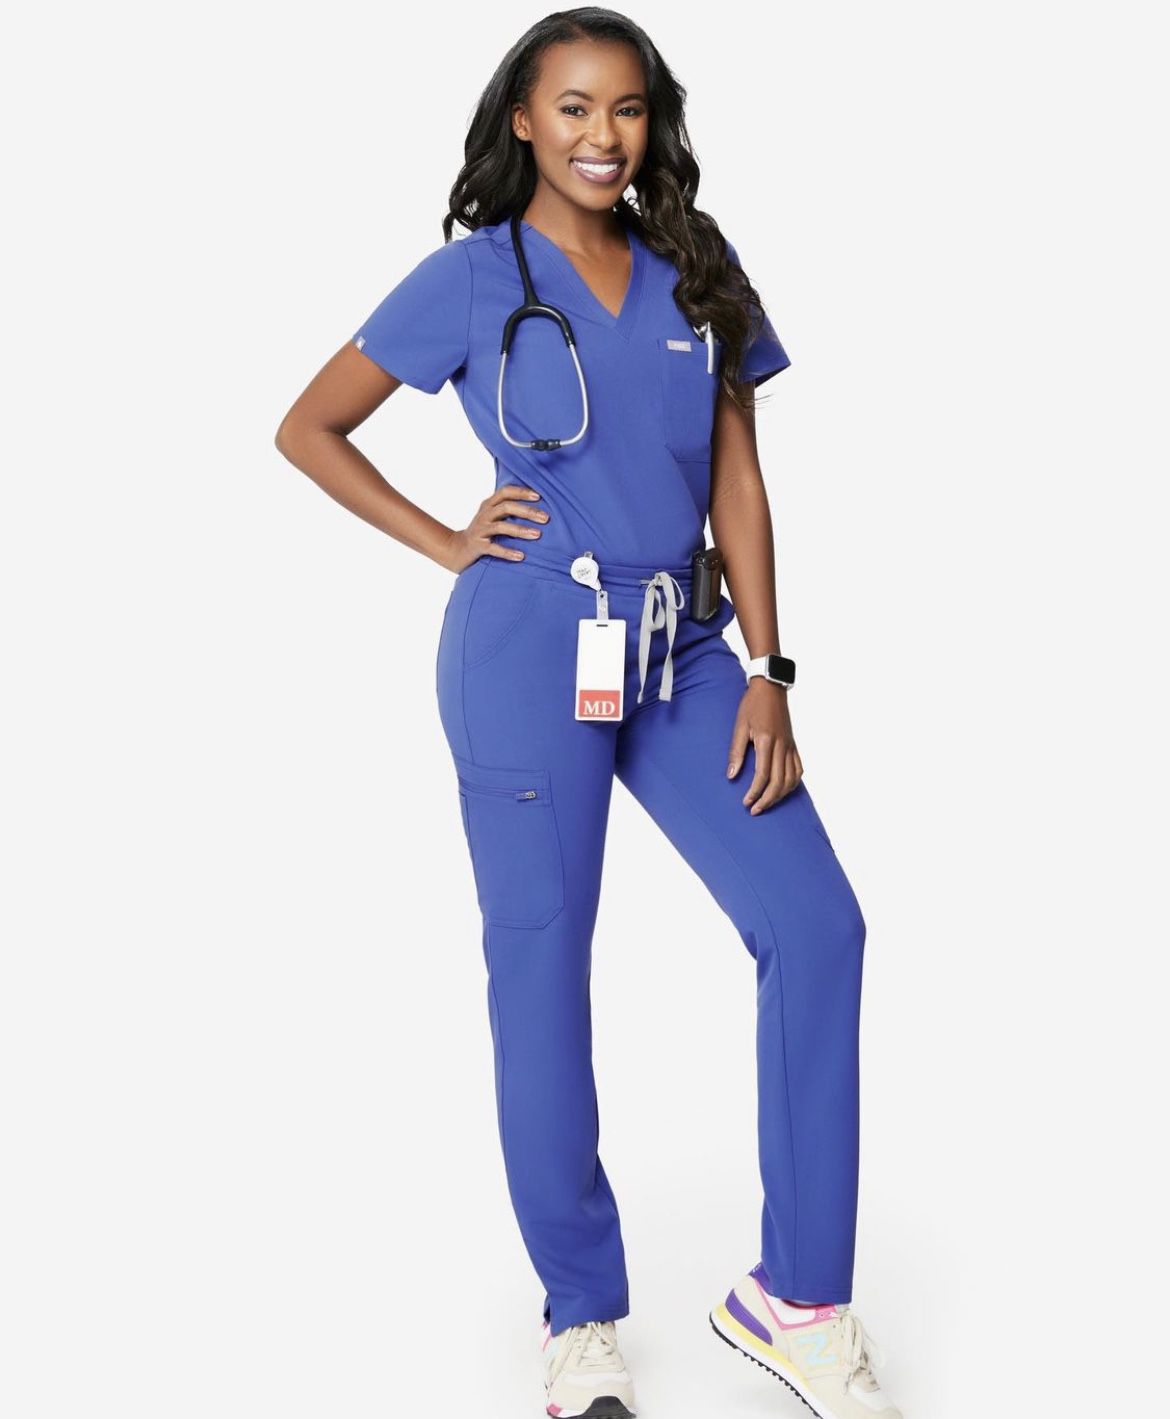 Figs limited Edition Color small Scrubs